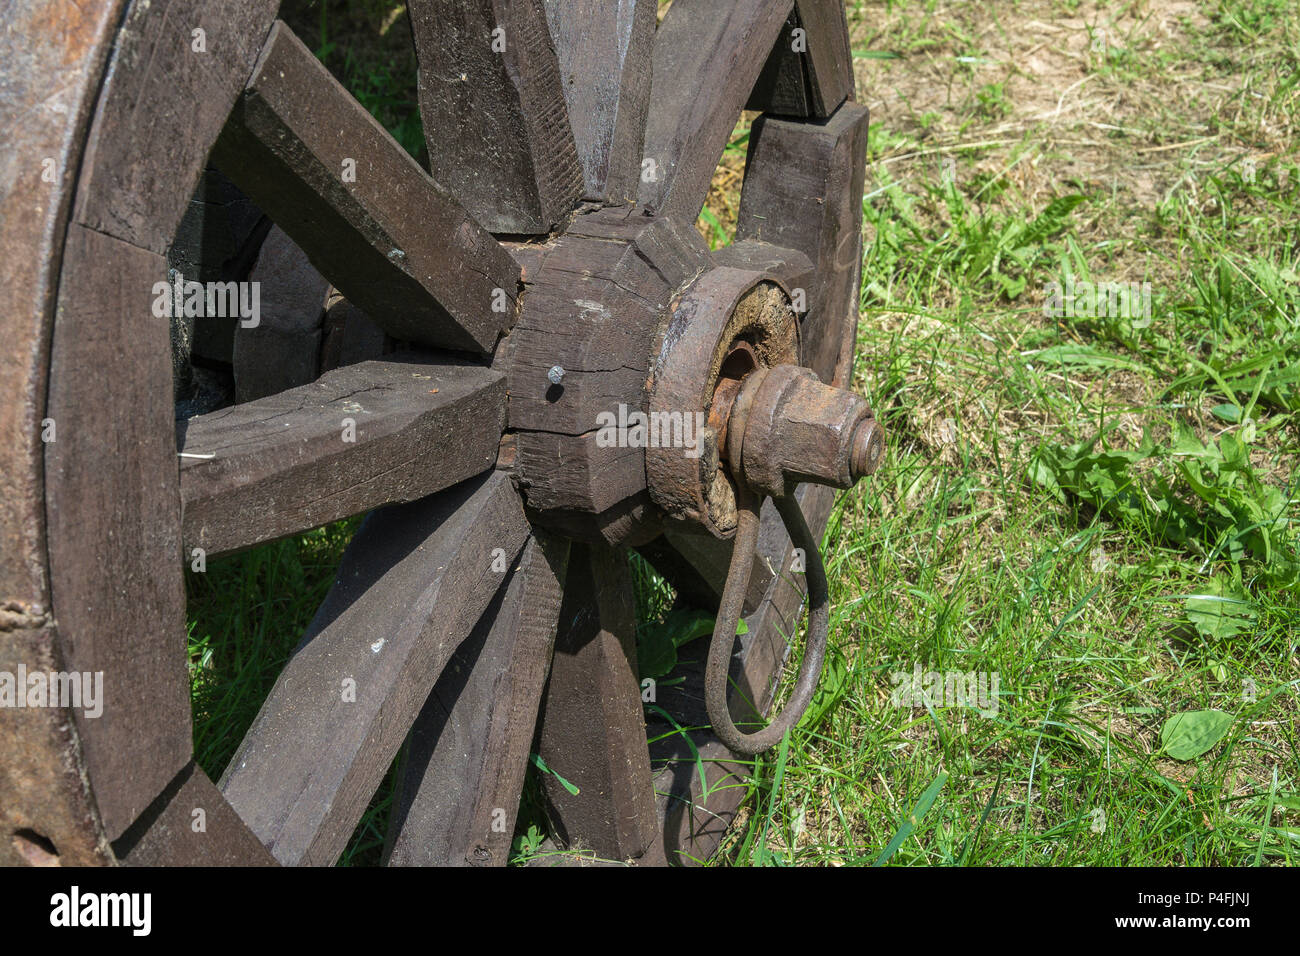 Fixing an old wooden wheel with a metal rim on a rural cart, close - up Stock Photo